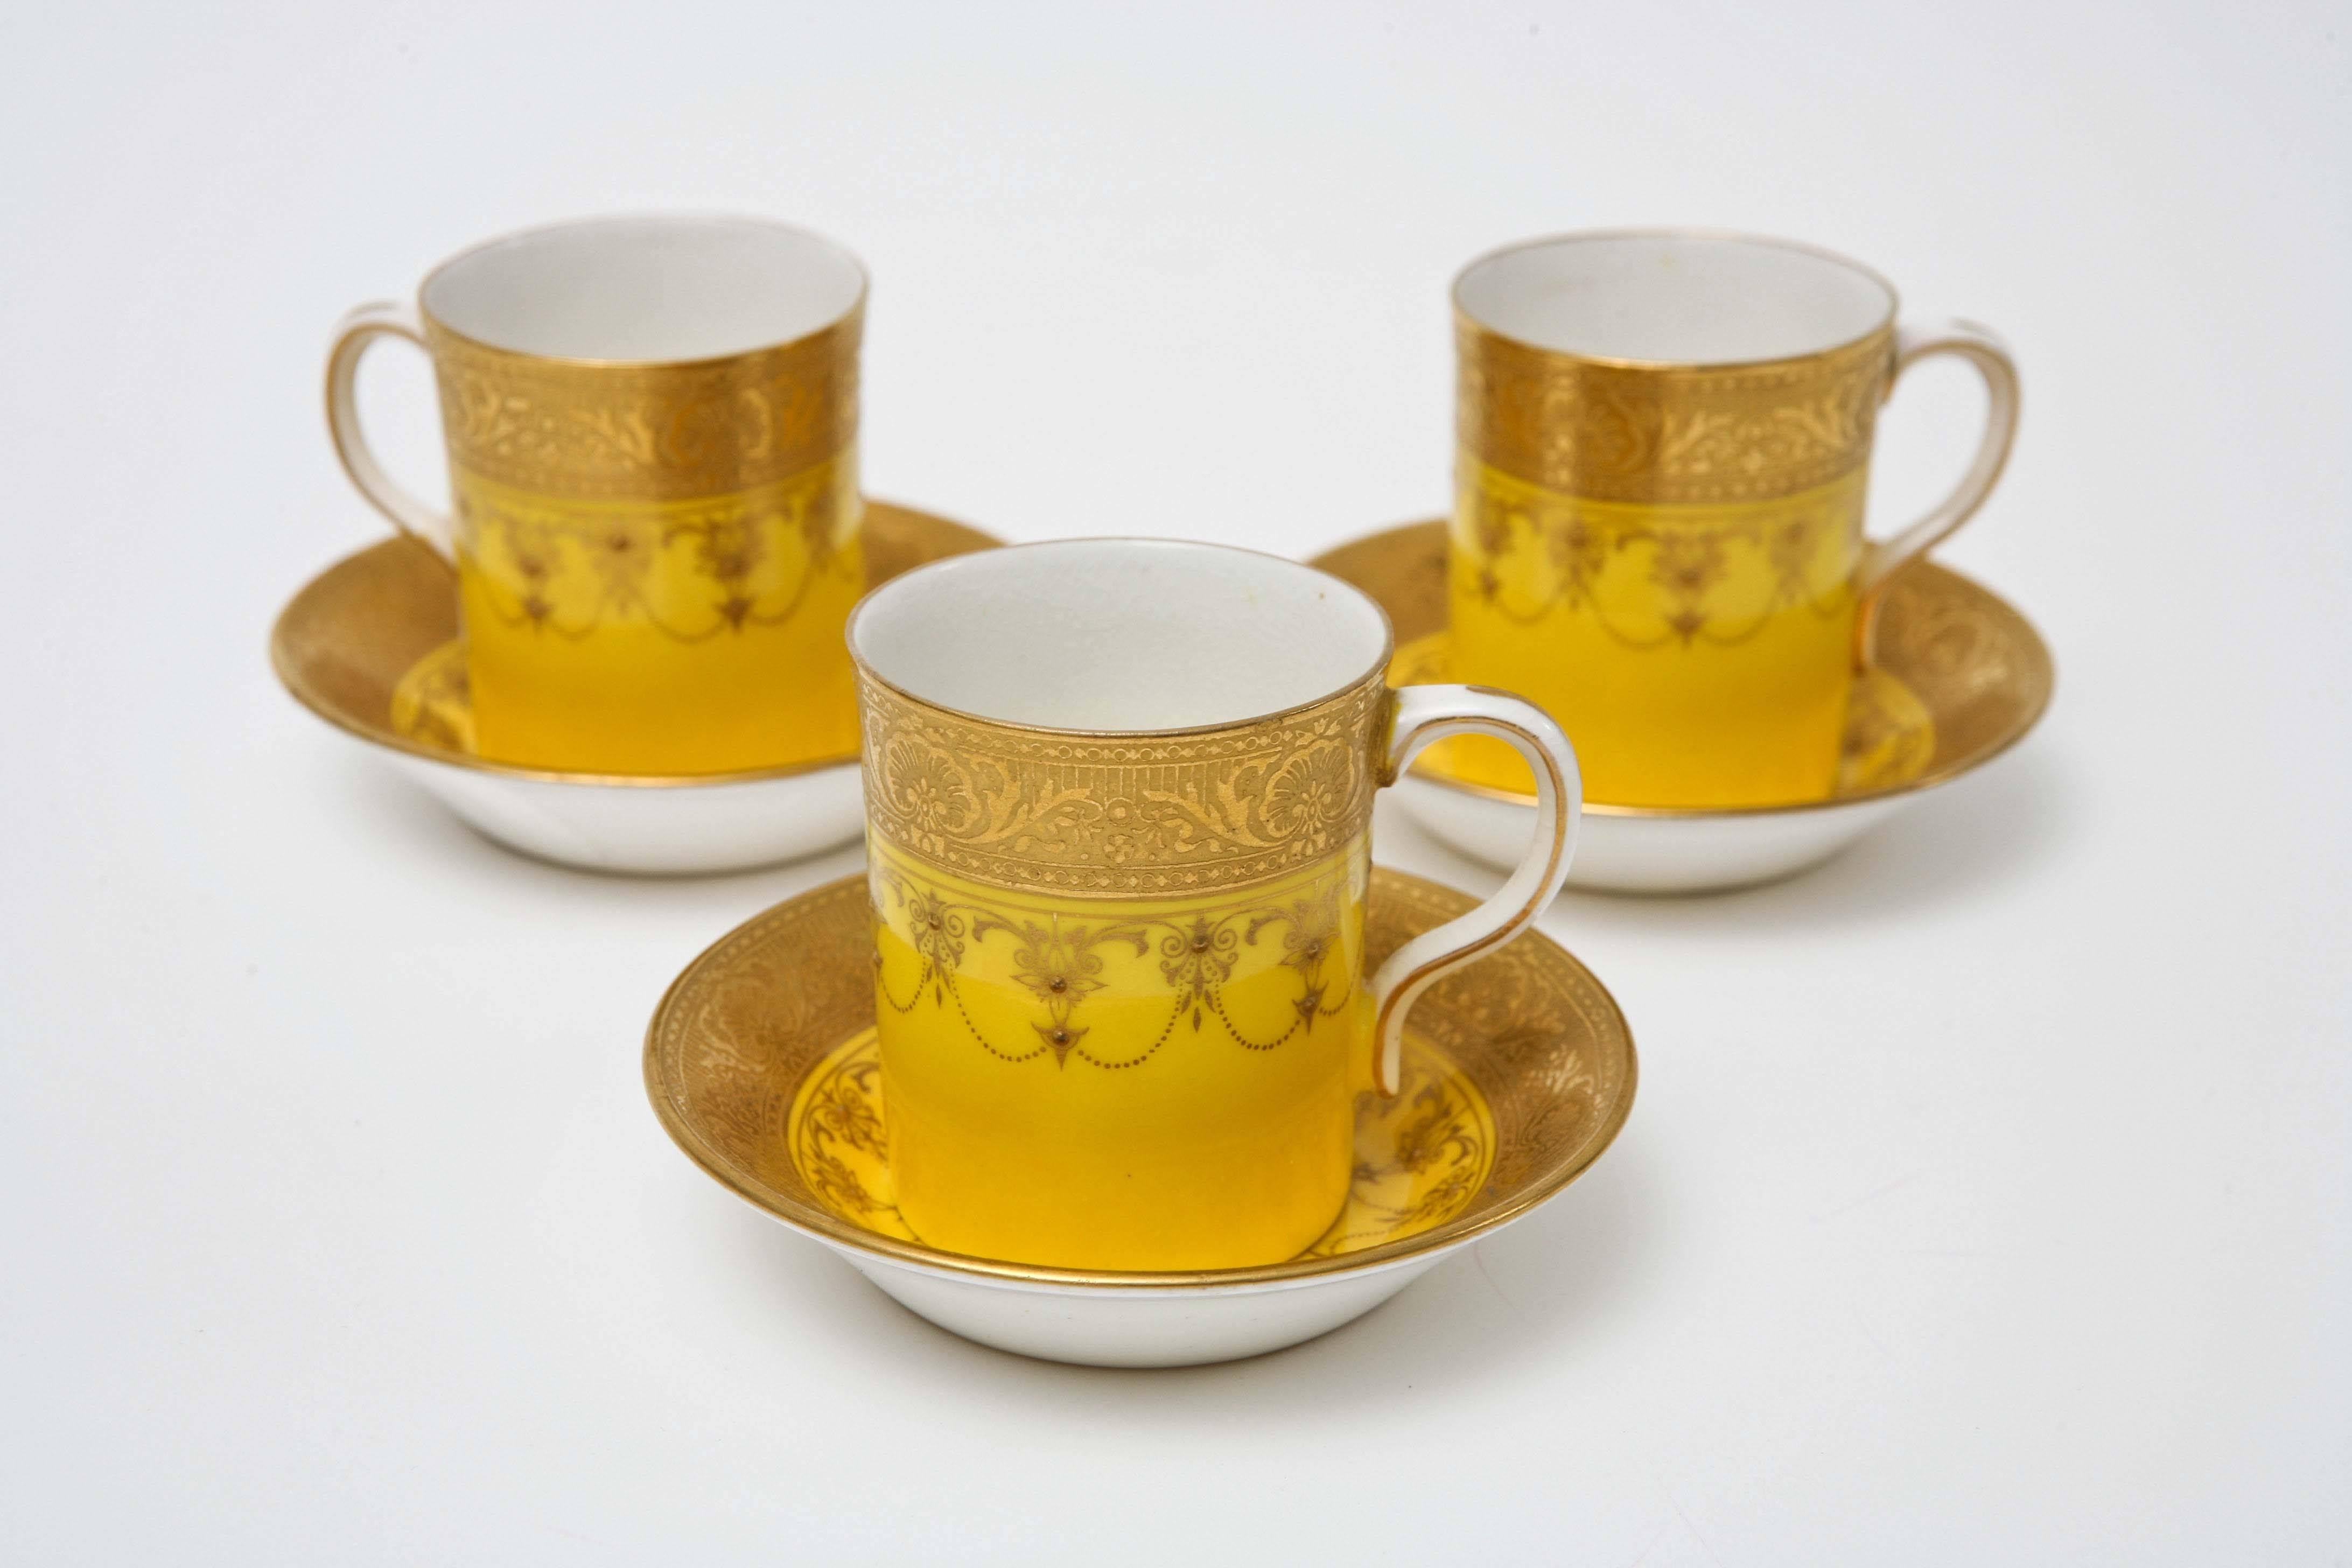 A set of 4 rare and hard to find yellow sweet little after dinner demi tasse coffee sets. These feature a beautiful raised gold swag motif and acid etched gold bands. Custom ordered though the fine retailer of Mappin and Webb London. Please note